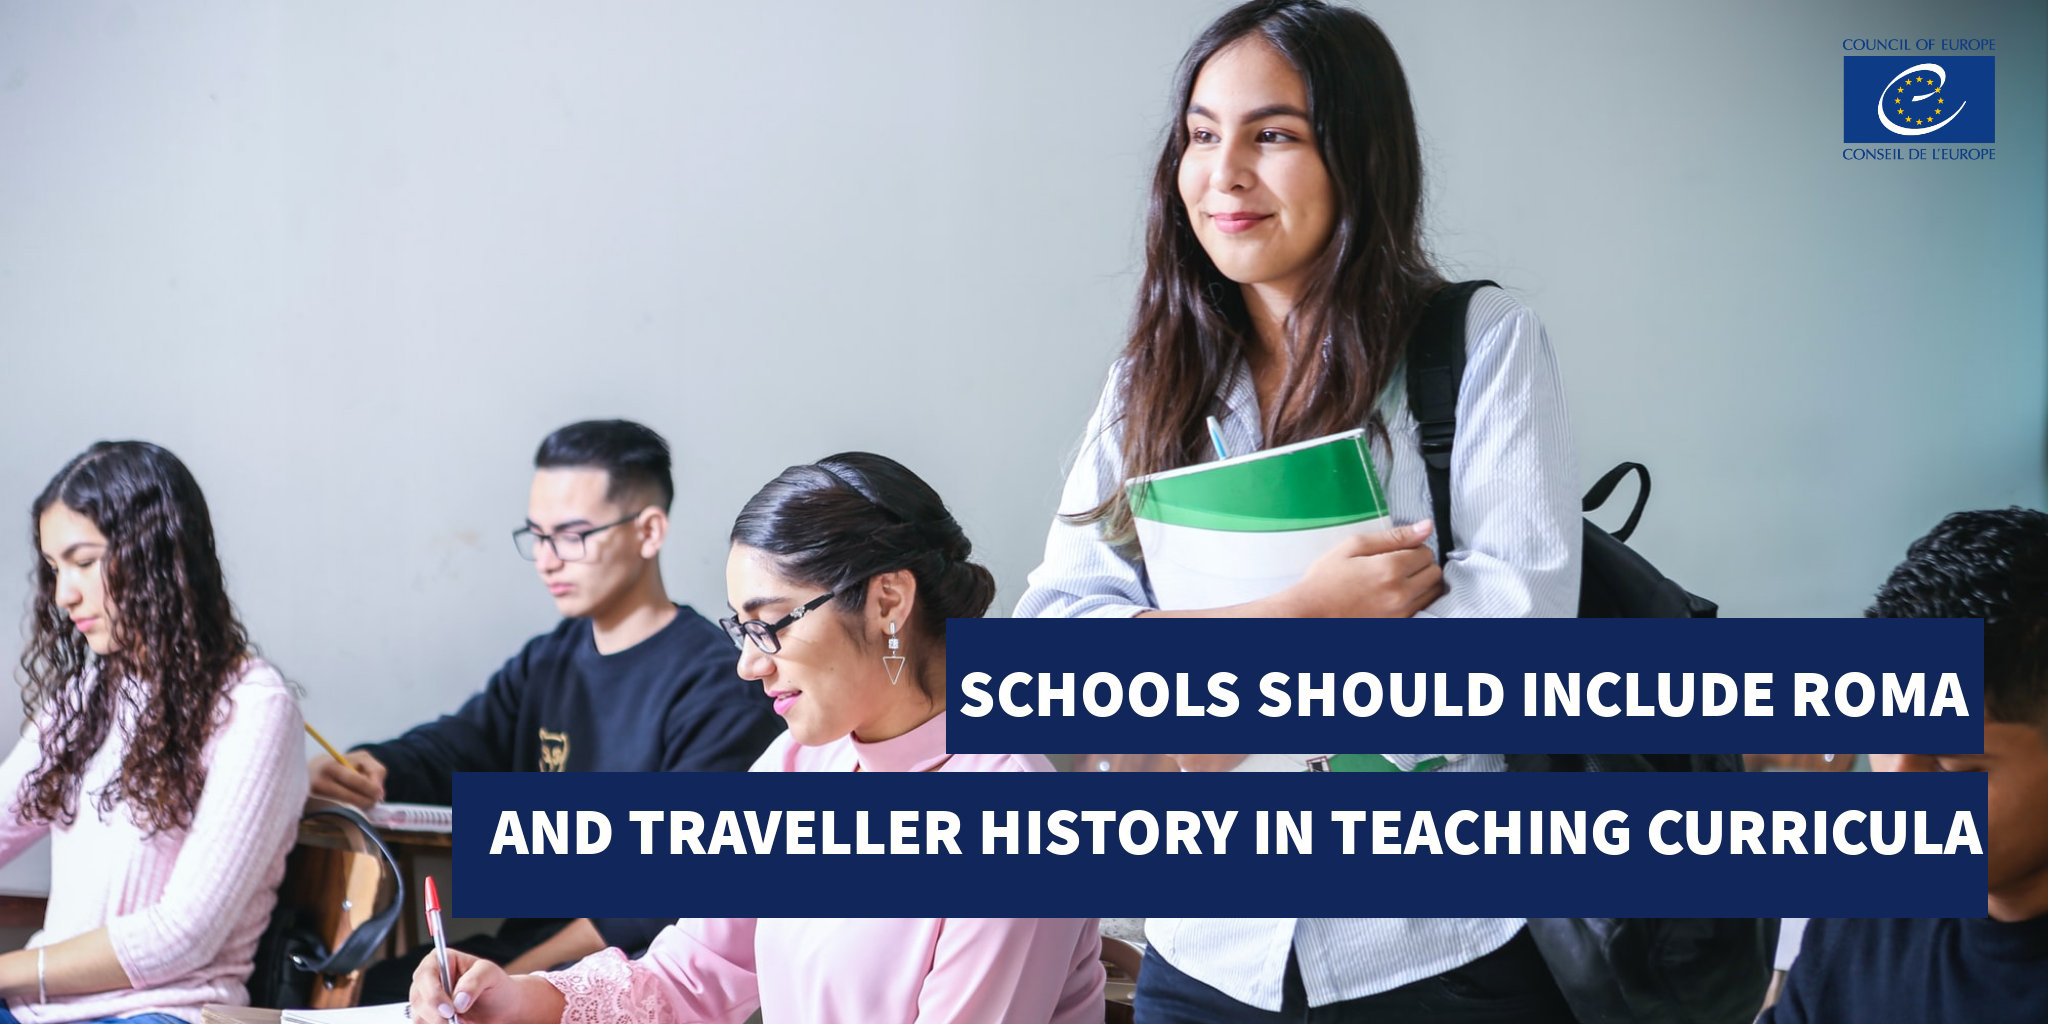 Schools should include Roma and Traveller history in teaching curricula: Council of Europe Recommendation